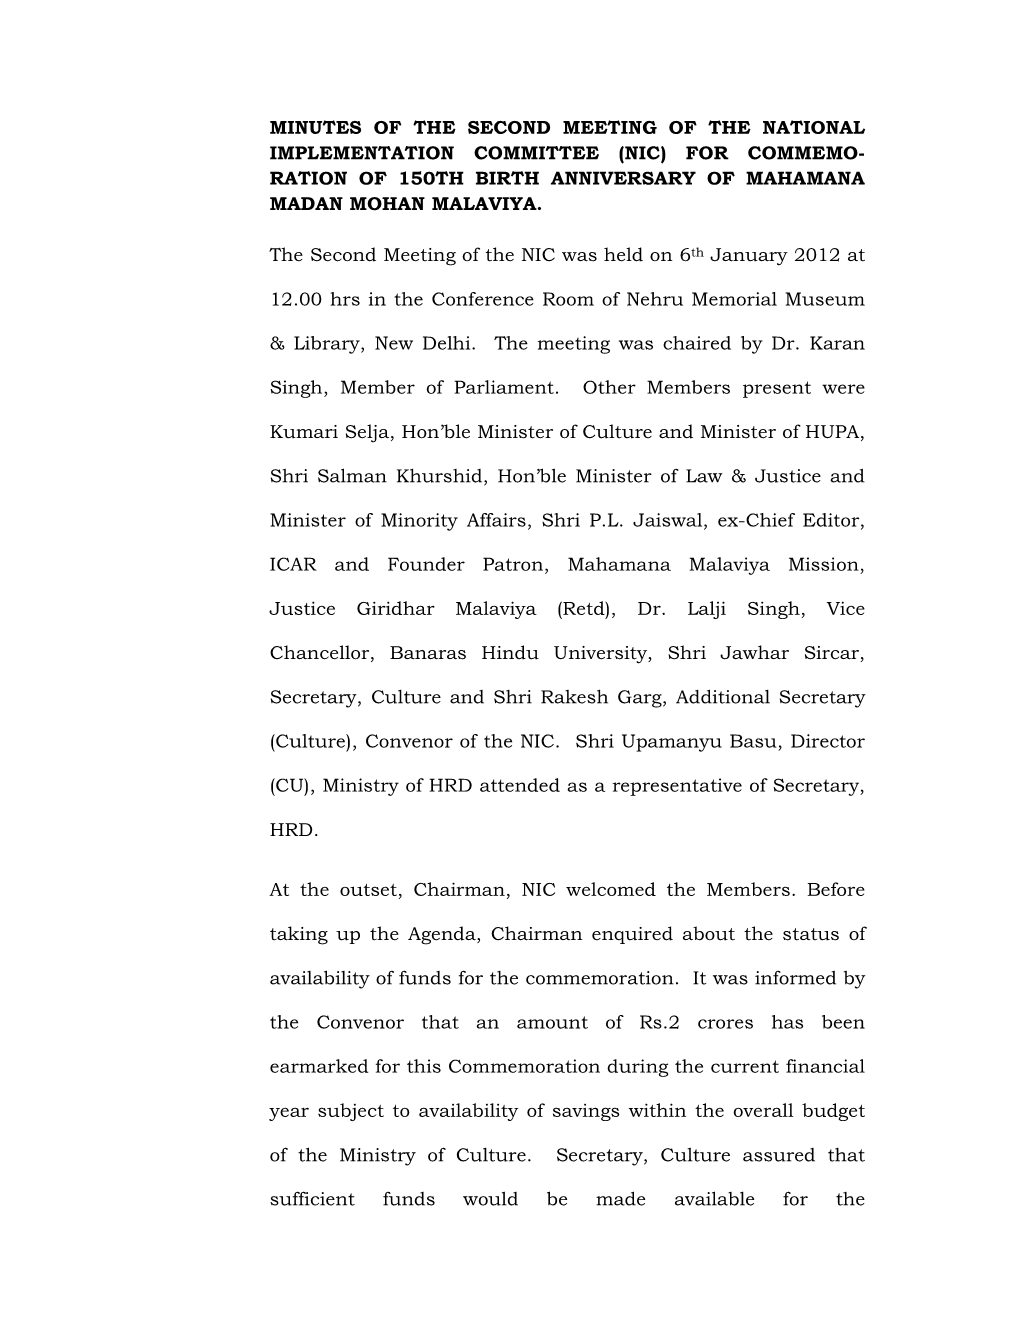 Minutes of the Second Meeting of the National Implementation Committee (Nic) for Commemo- Ration of 150Th Birth Anniversary of Mahamana Madan Mohan Malaviya